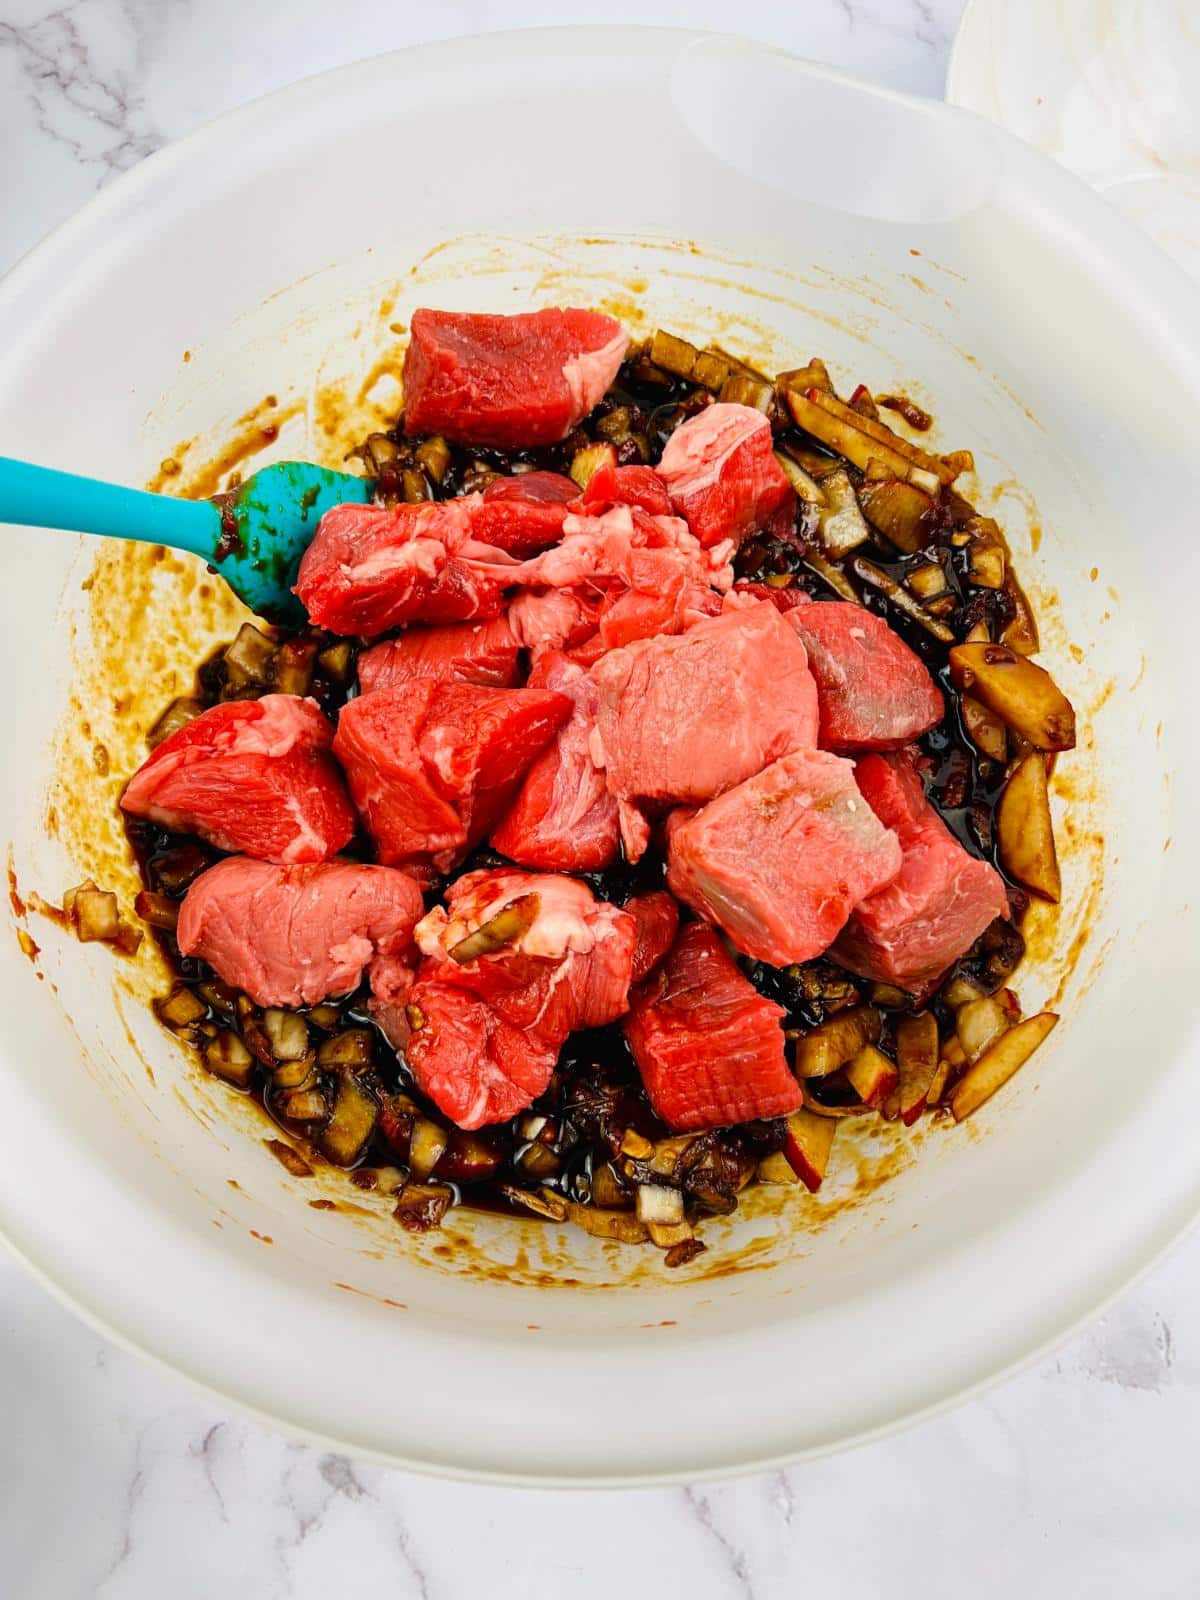 Raw beef is added into the marinade mixture in a bowl with a blue spatula.